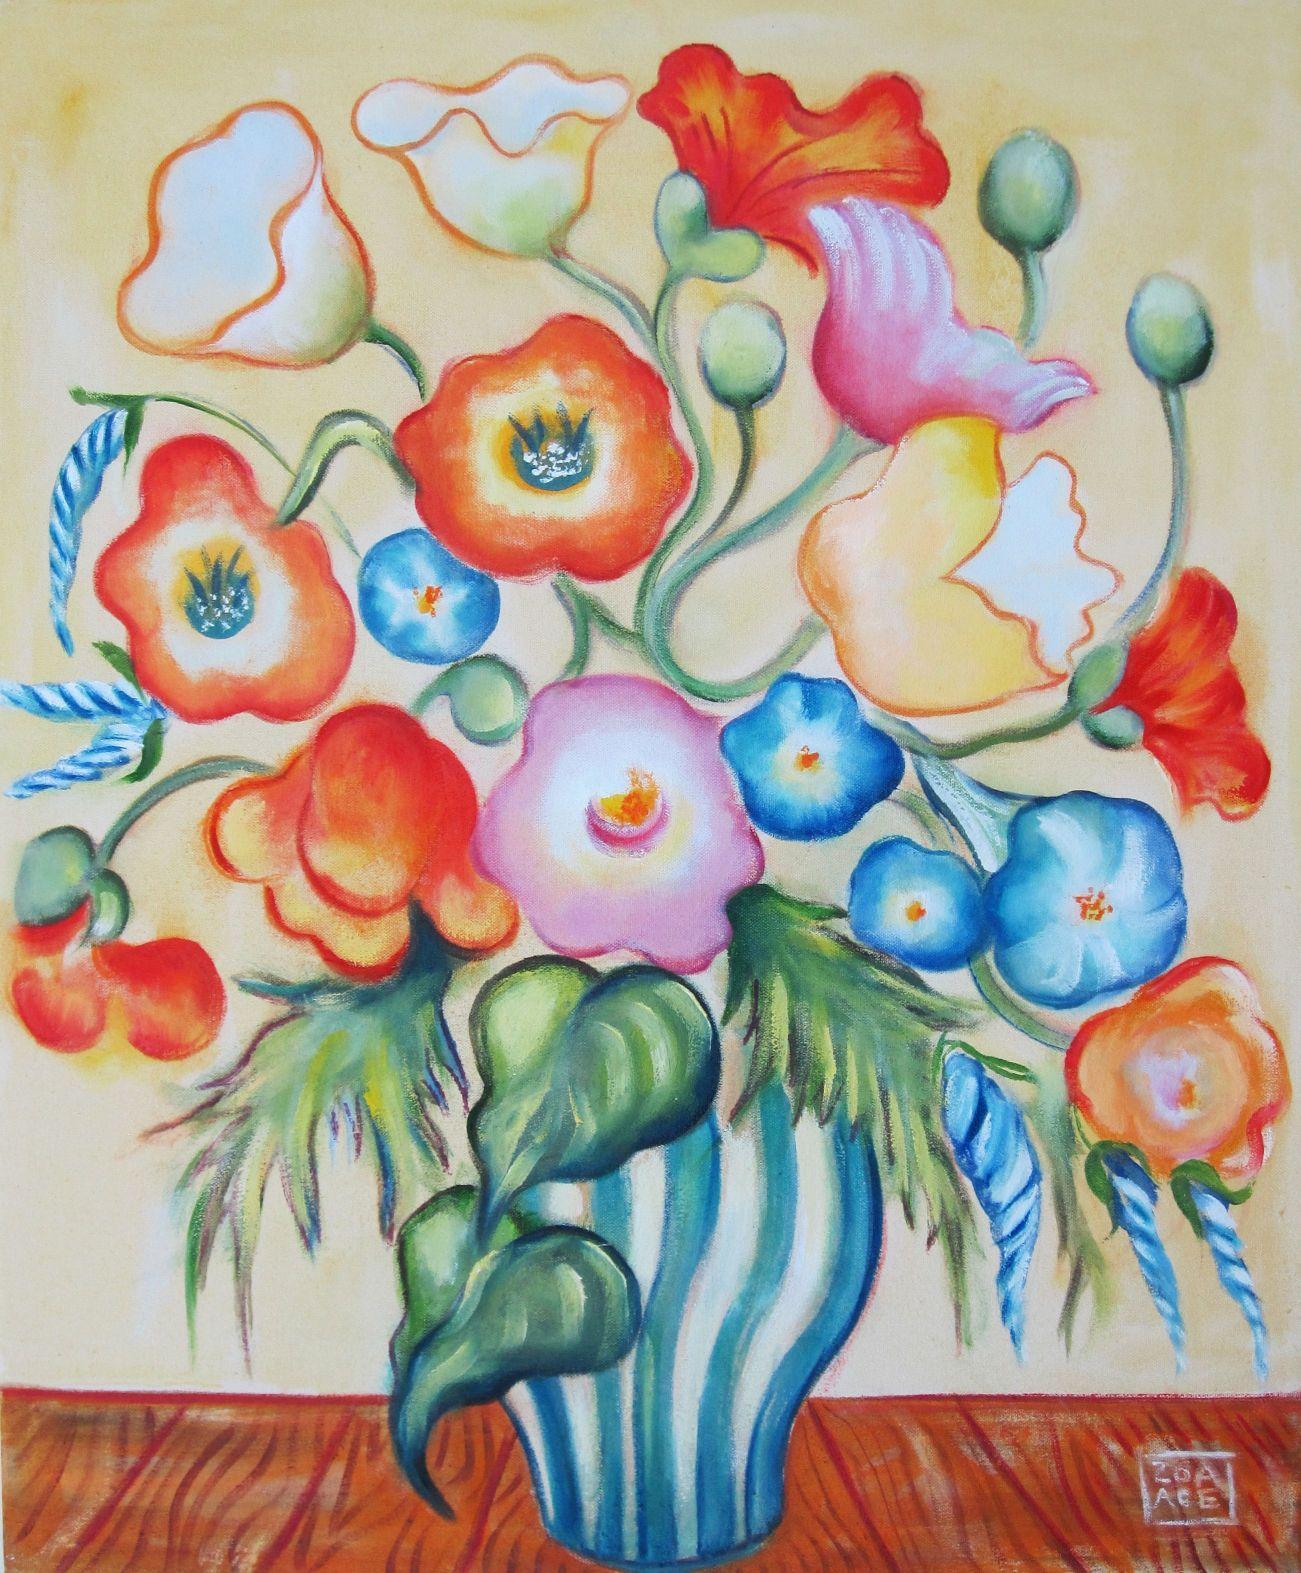 Zoa Ace Figurative Painting - "Poppies with Morning Glories" Oil Painting